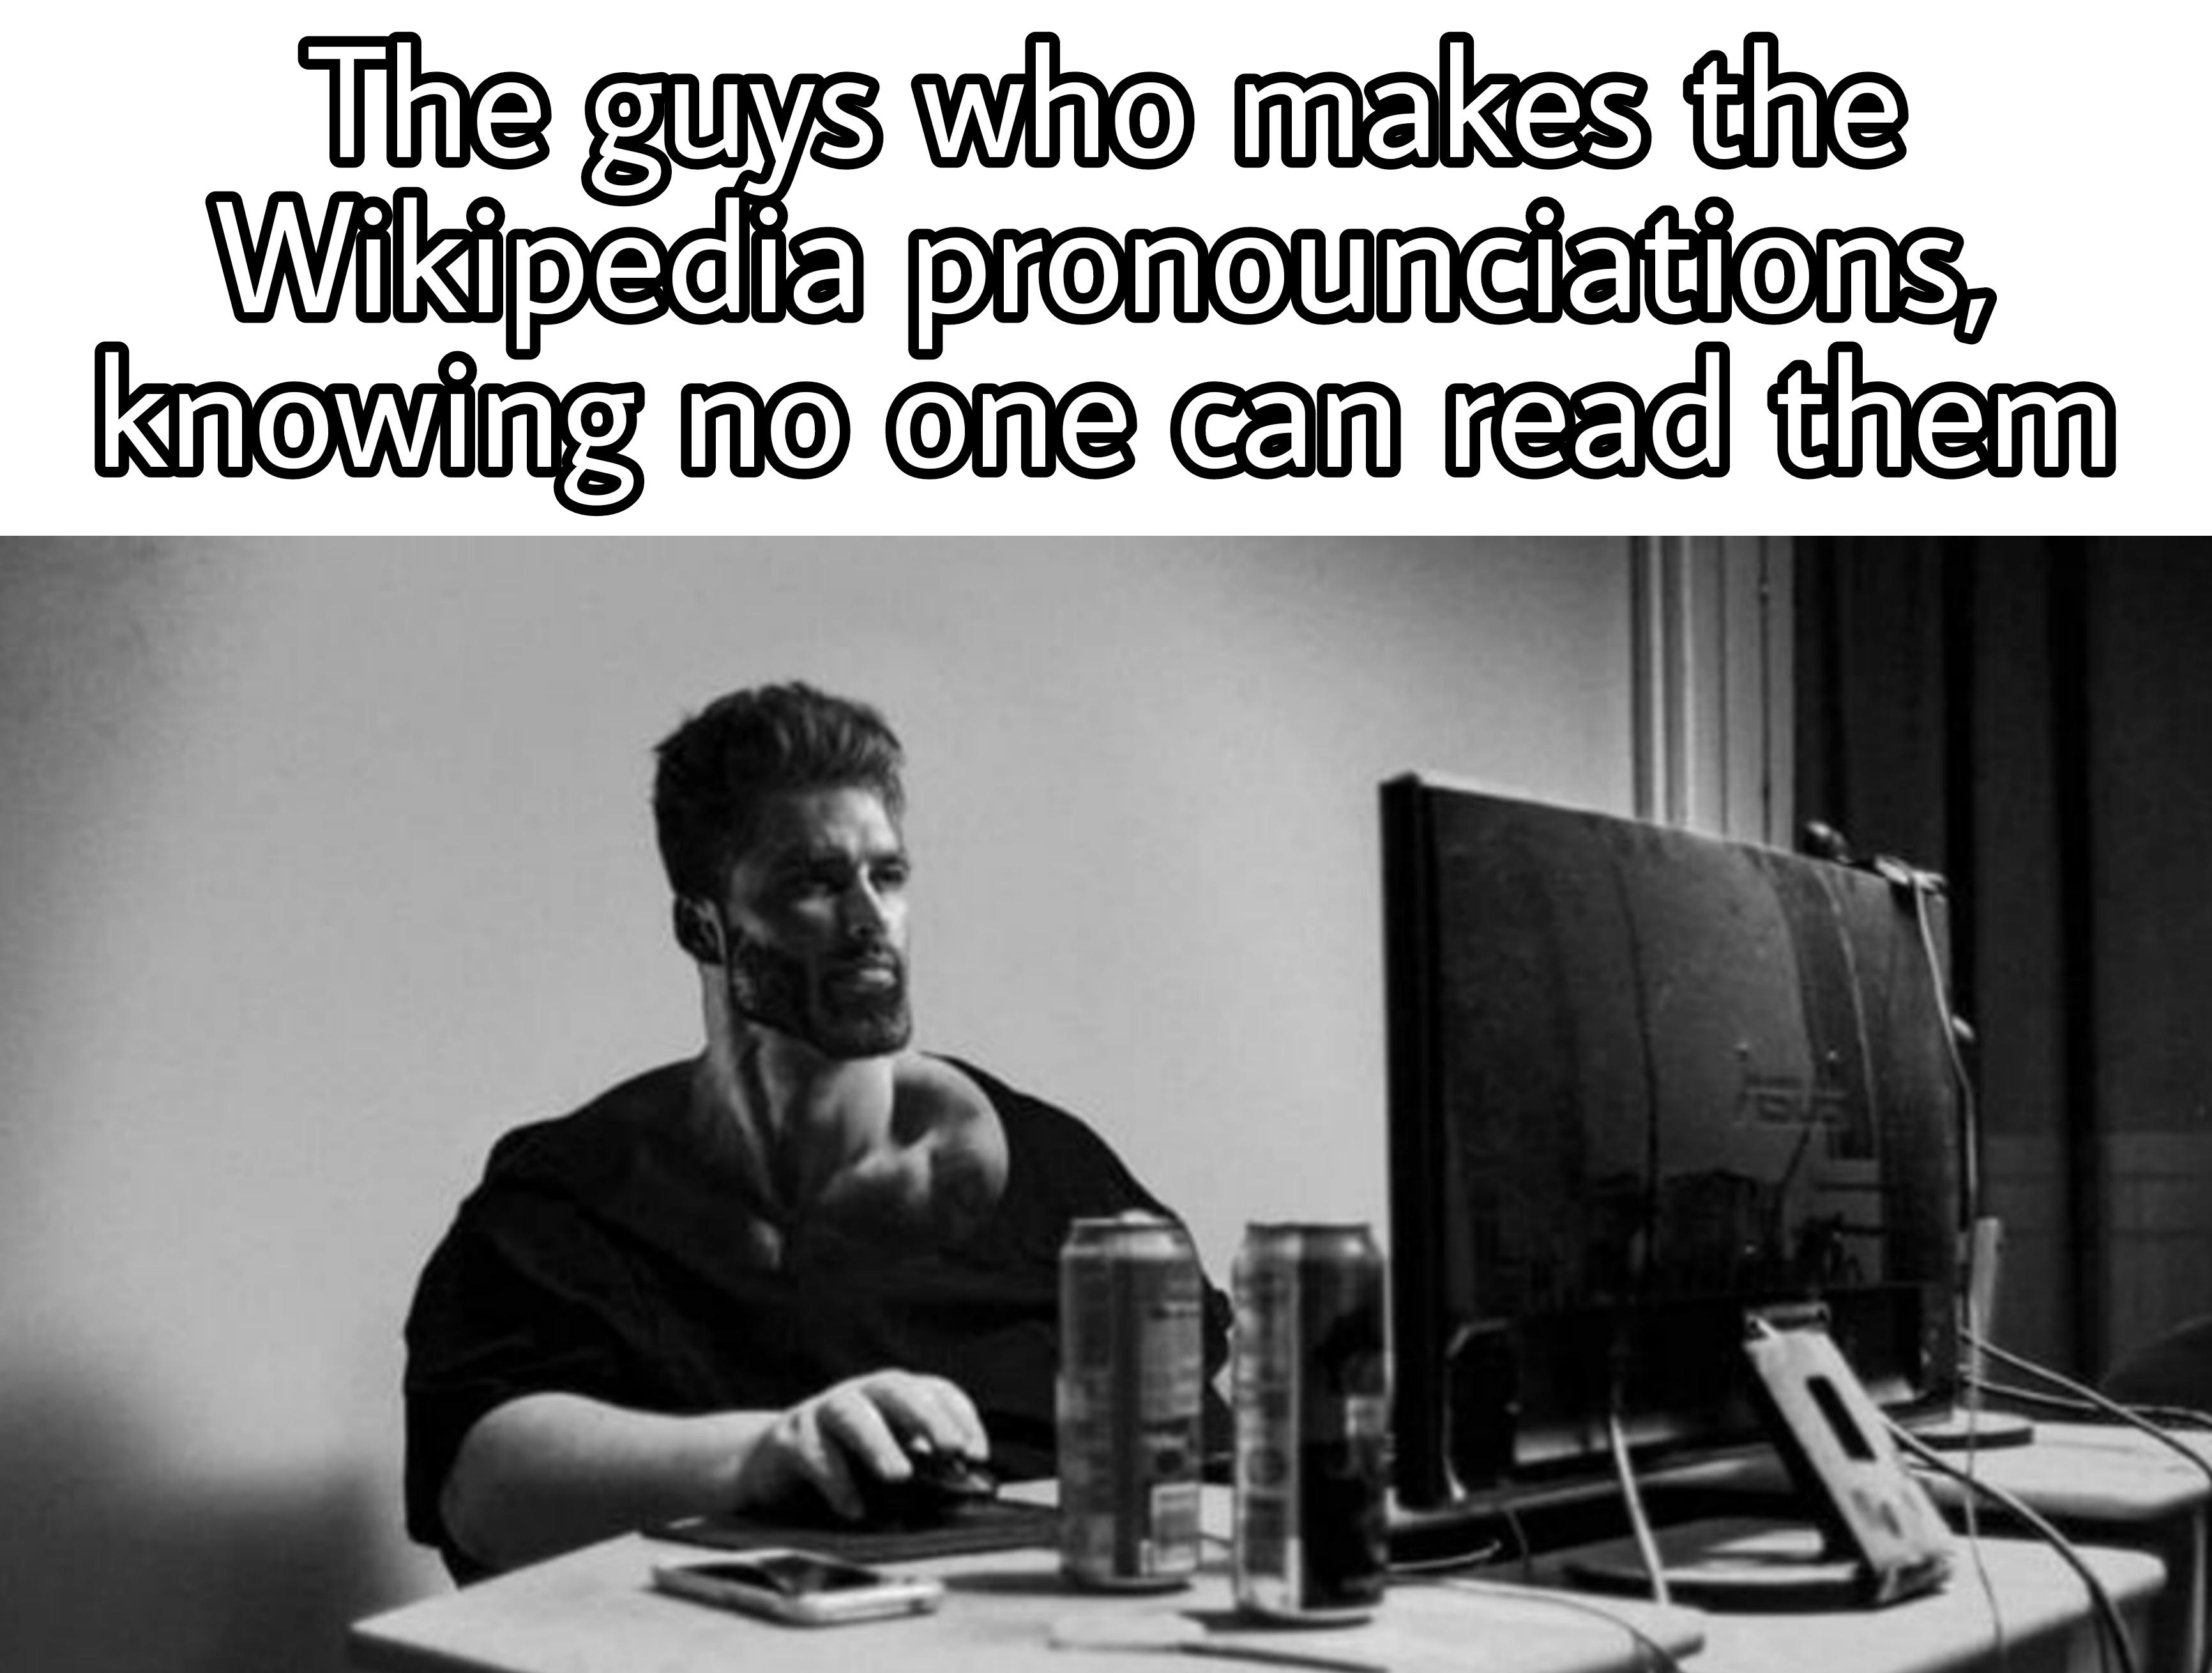 dank memes - funny memes - missing out on teenage love - The guys who makes the Wikipedia pronounciations, knowing no one can read them